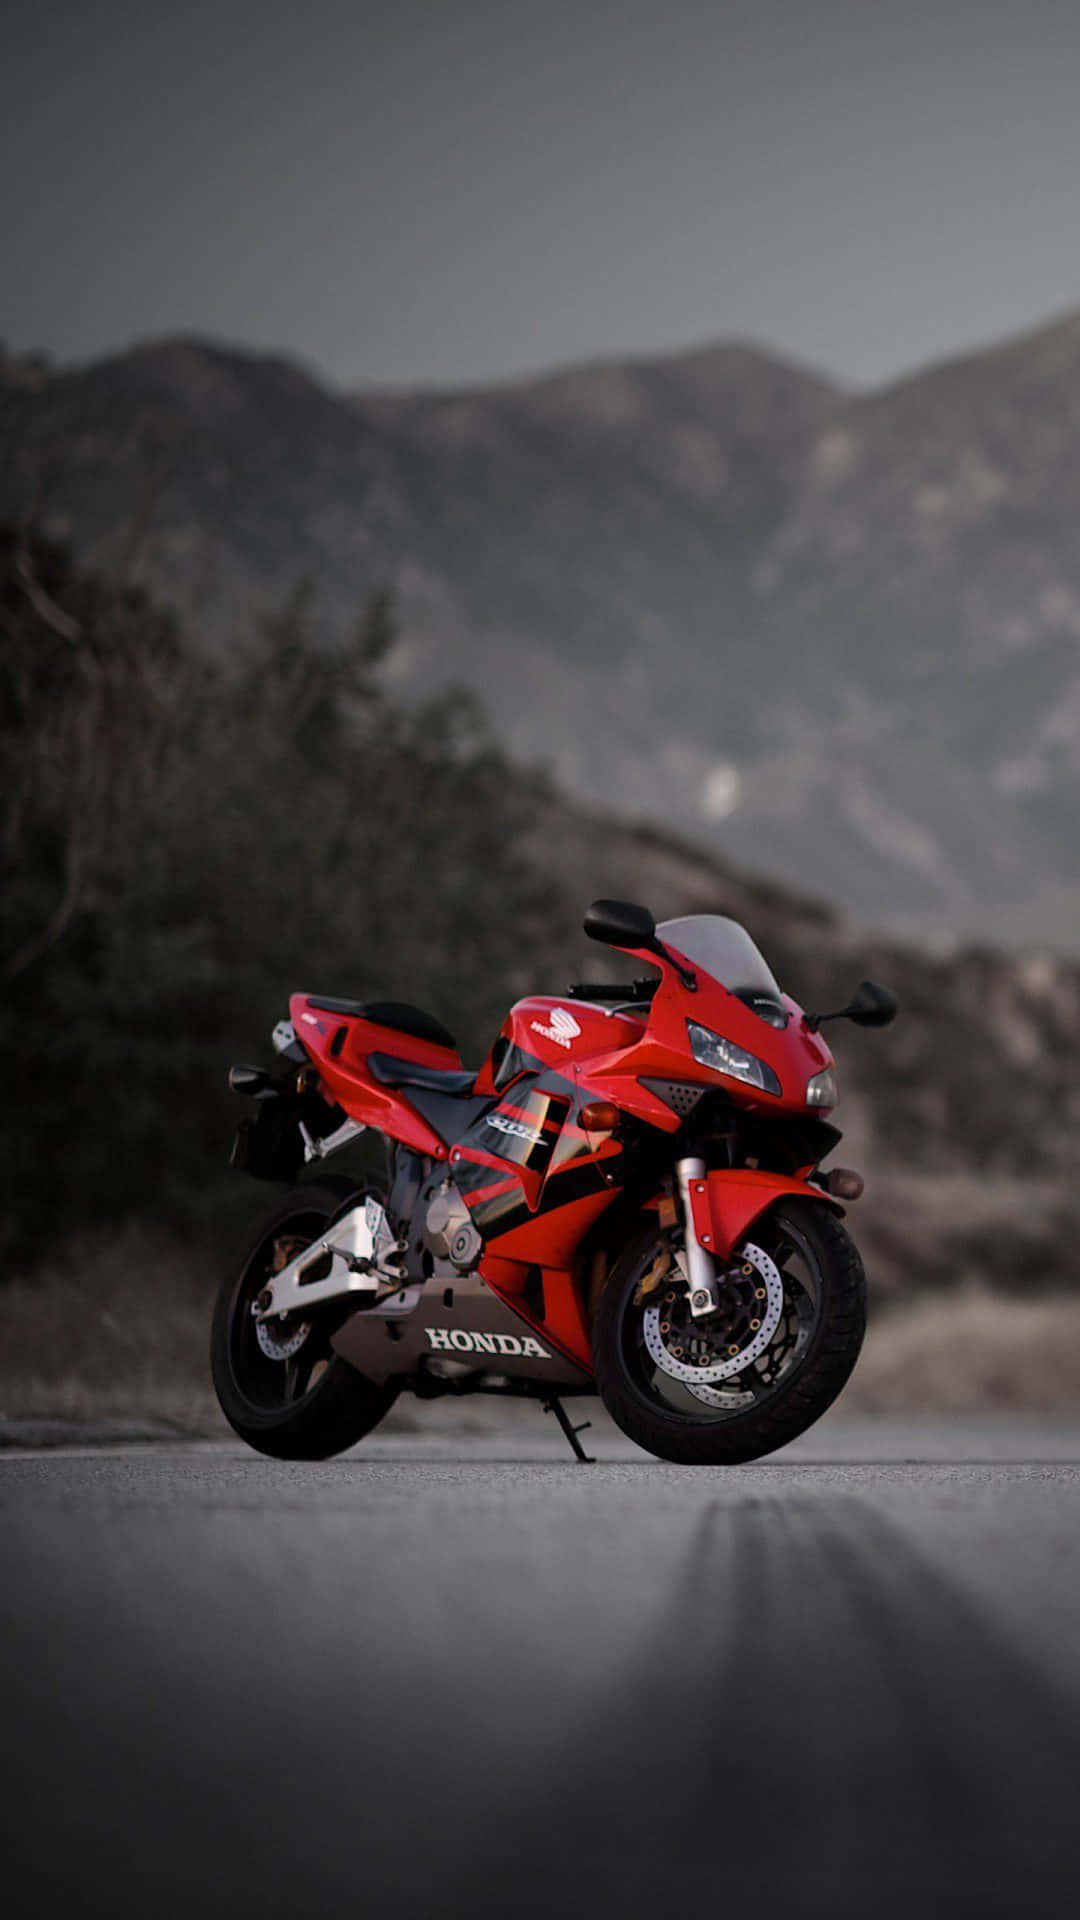 The open road beckons with this stunning Superbike